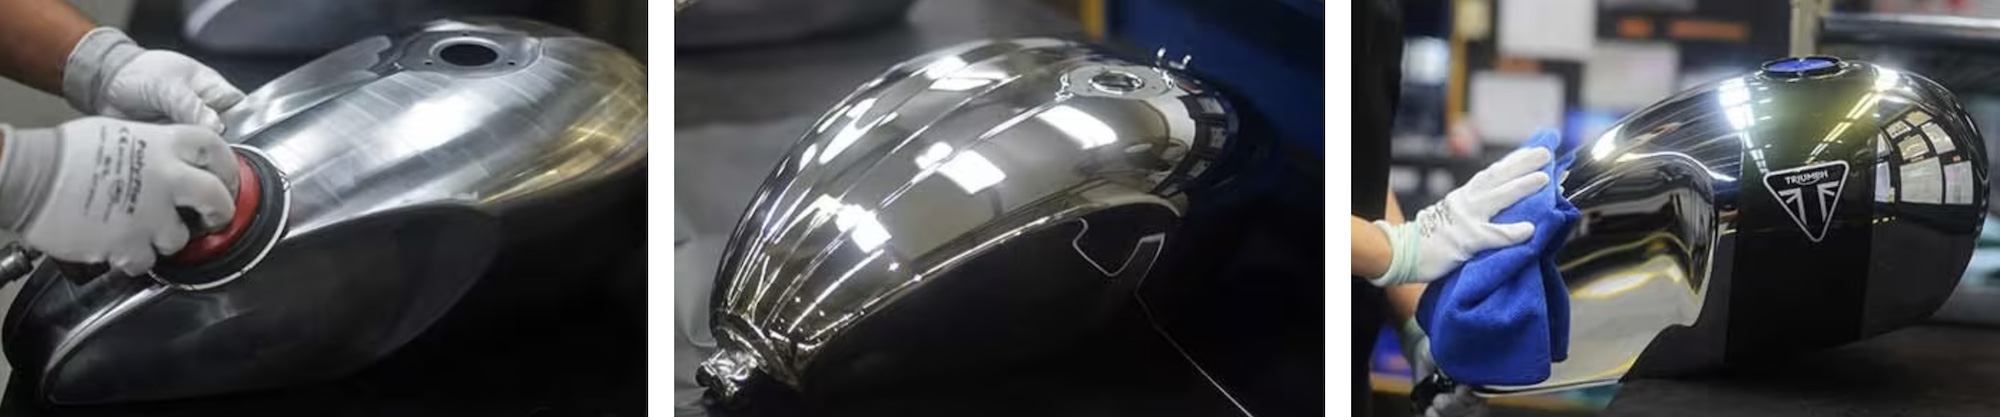 A motorcycle tank being chromed.